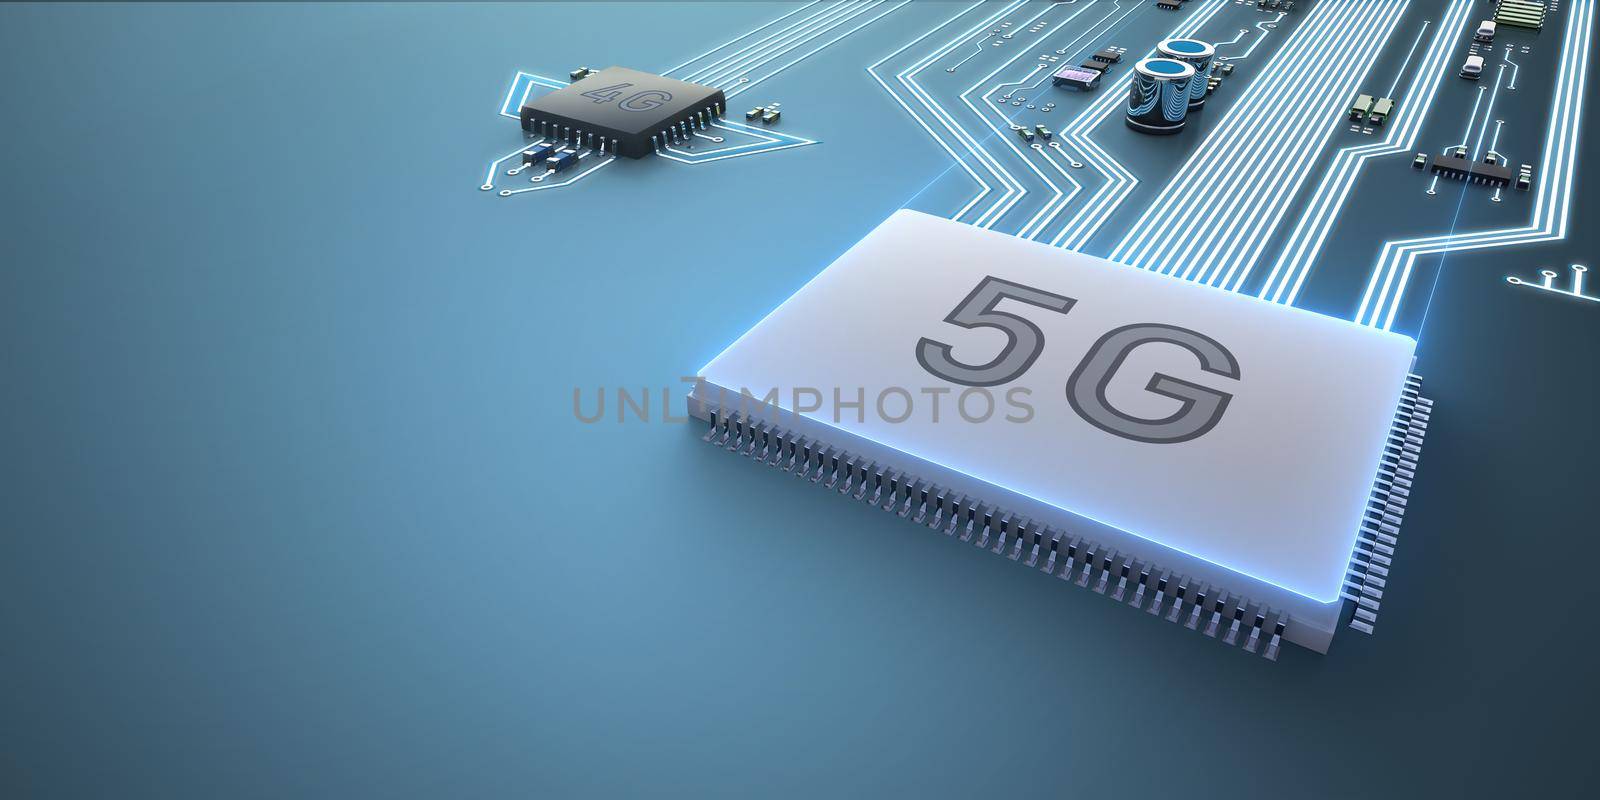 Abstract illustration of 5g and 4g processors competing with each other. Ahead is a processor with 5g technology.